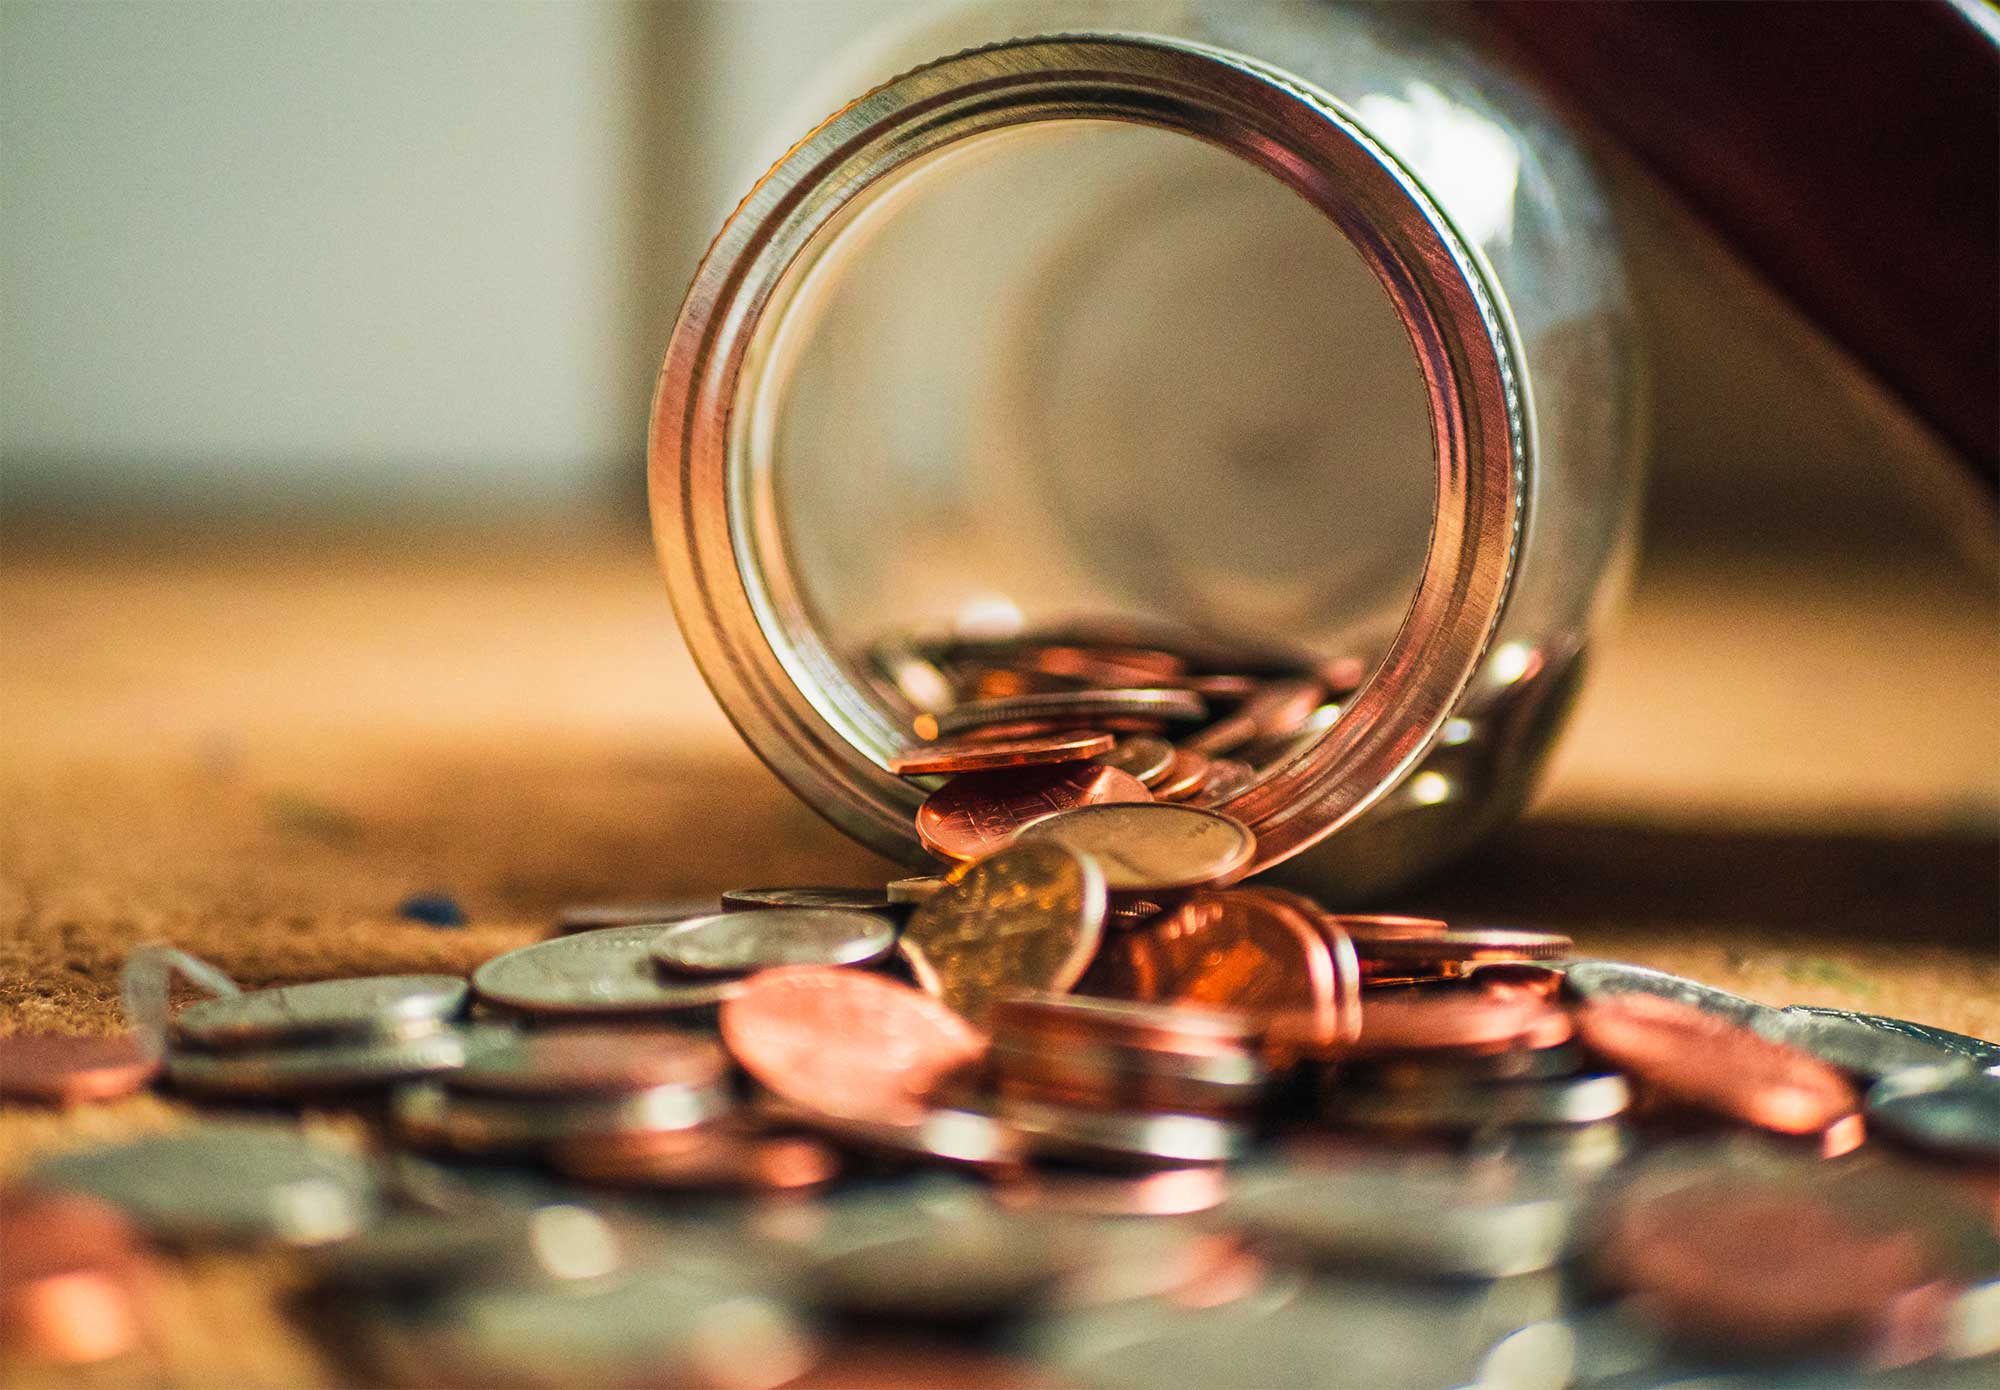  An overturned jar spilling coins represents the search query 'Tips for separating business and personal finances'.